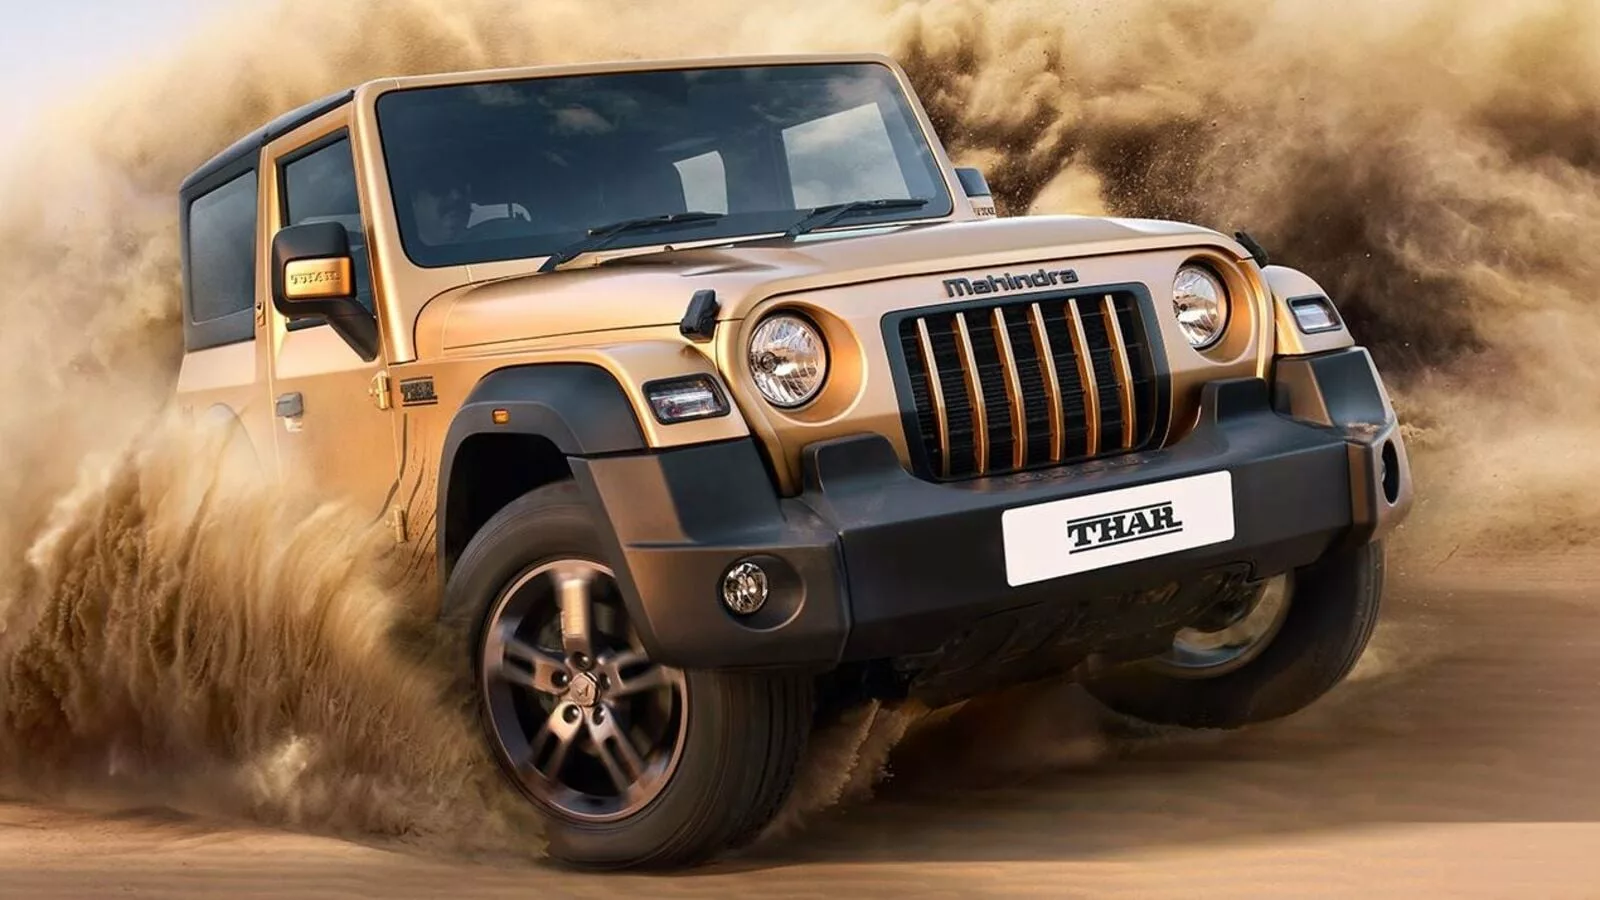 Mahindra Thar Earth Edition launched at ₹15.40 lakh. Check what's different